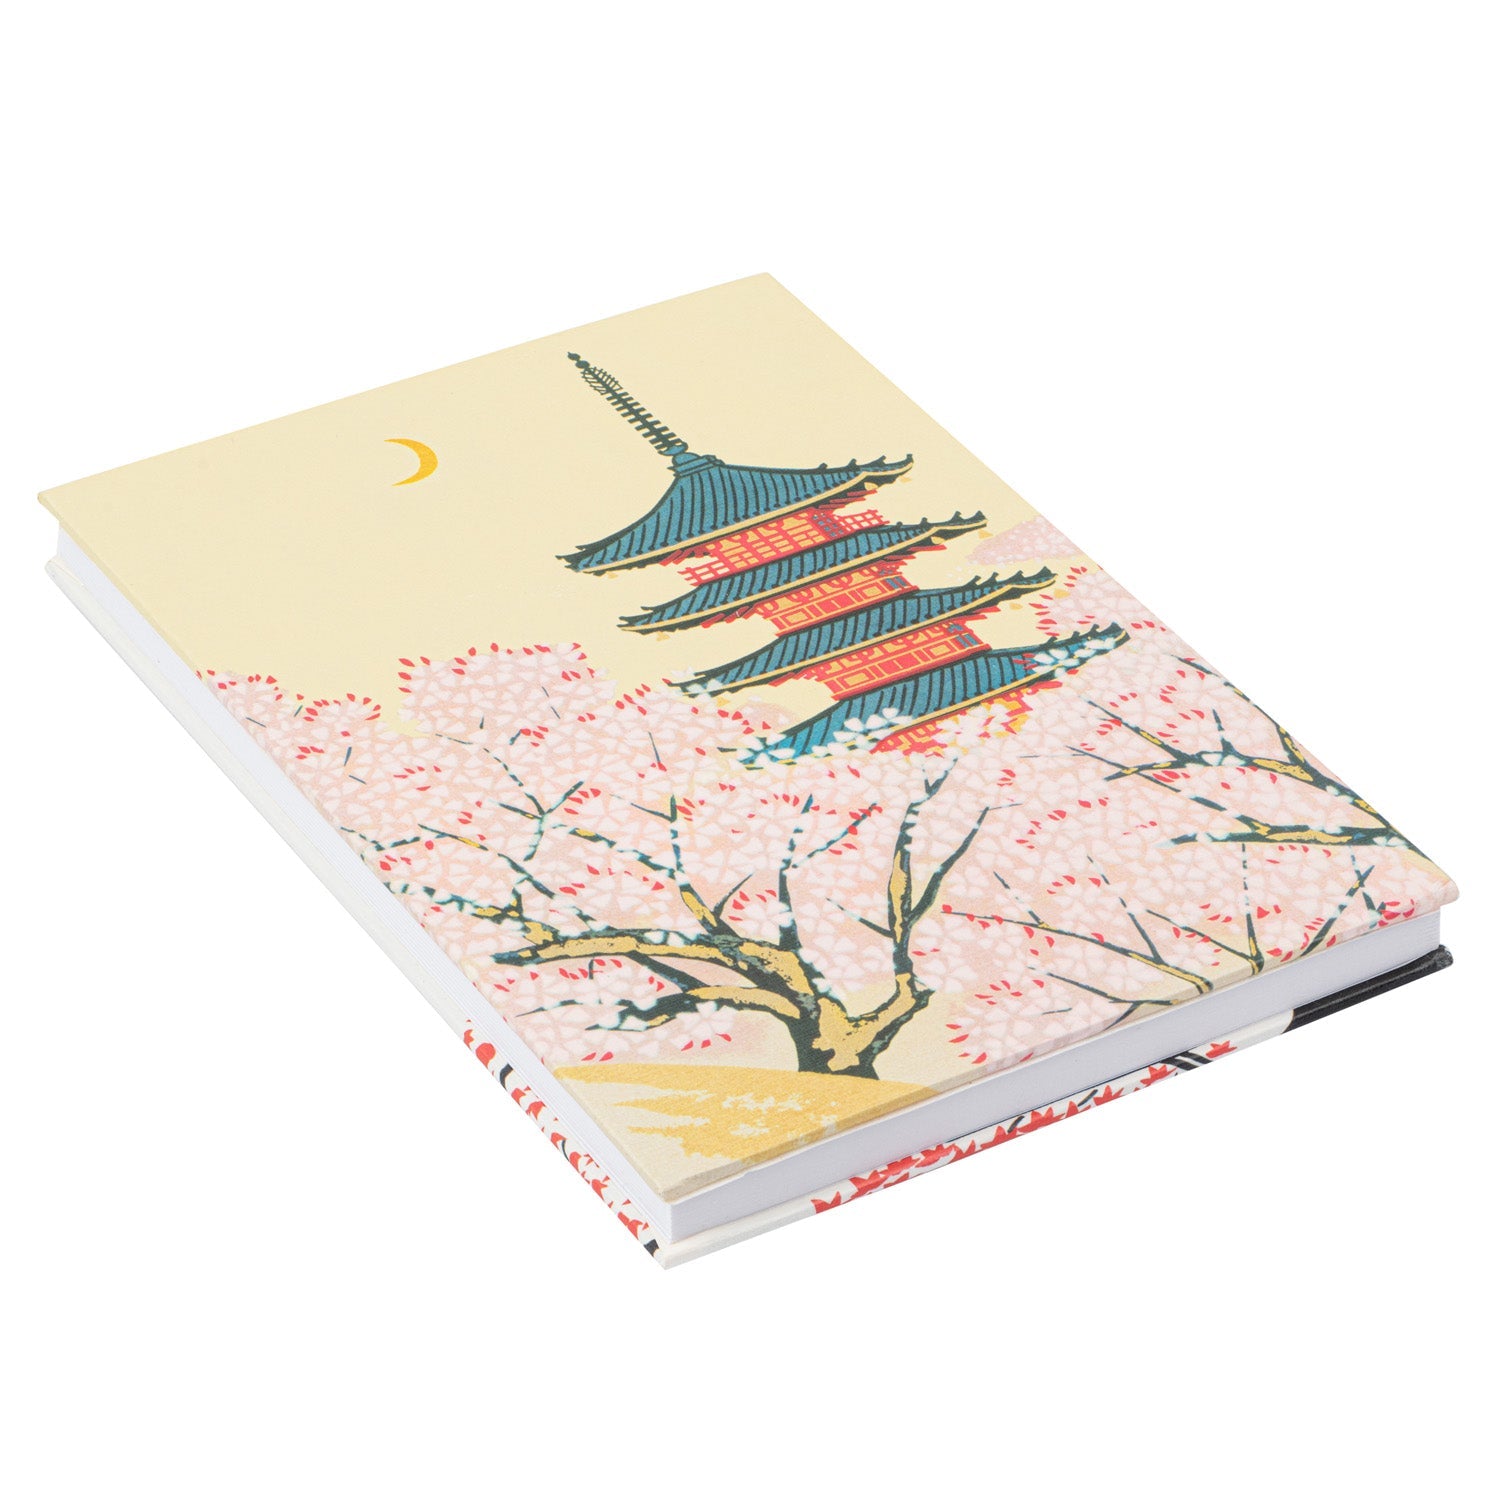 Pagoda and Cherry Blossom Japanese Stamp Book without strap